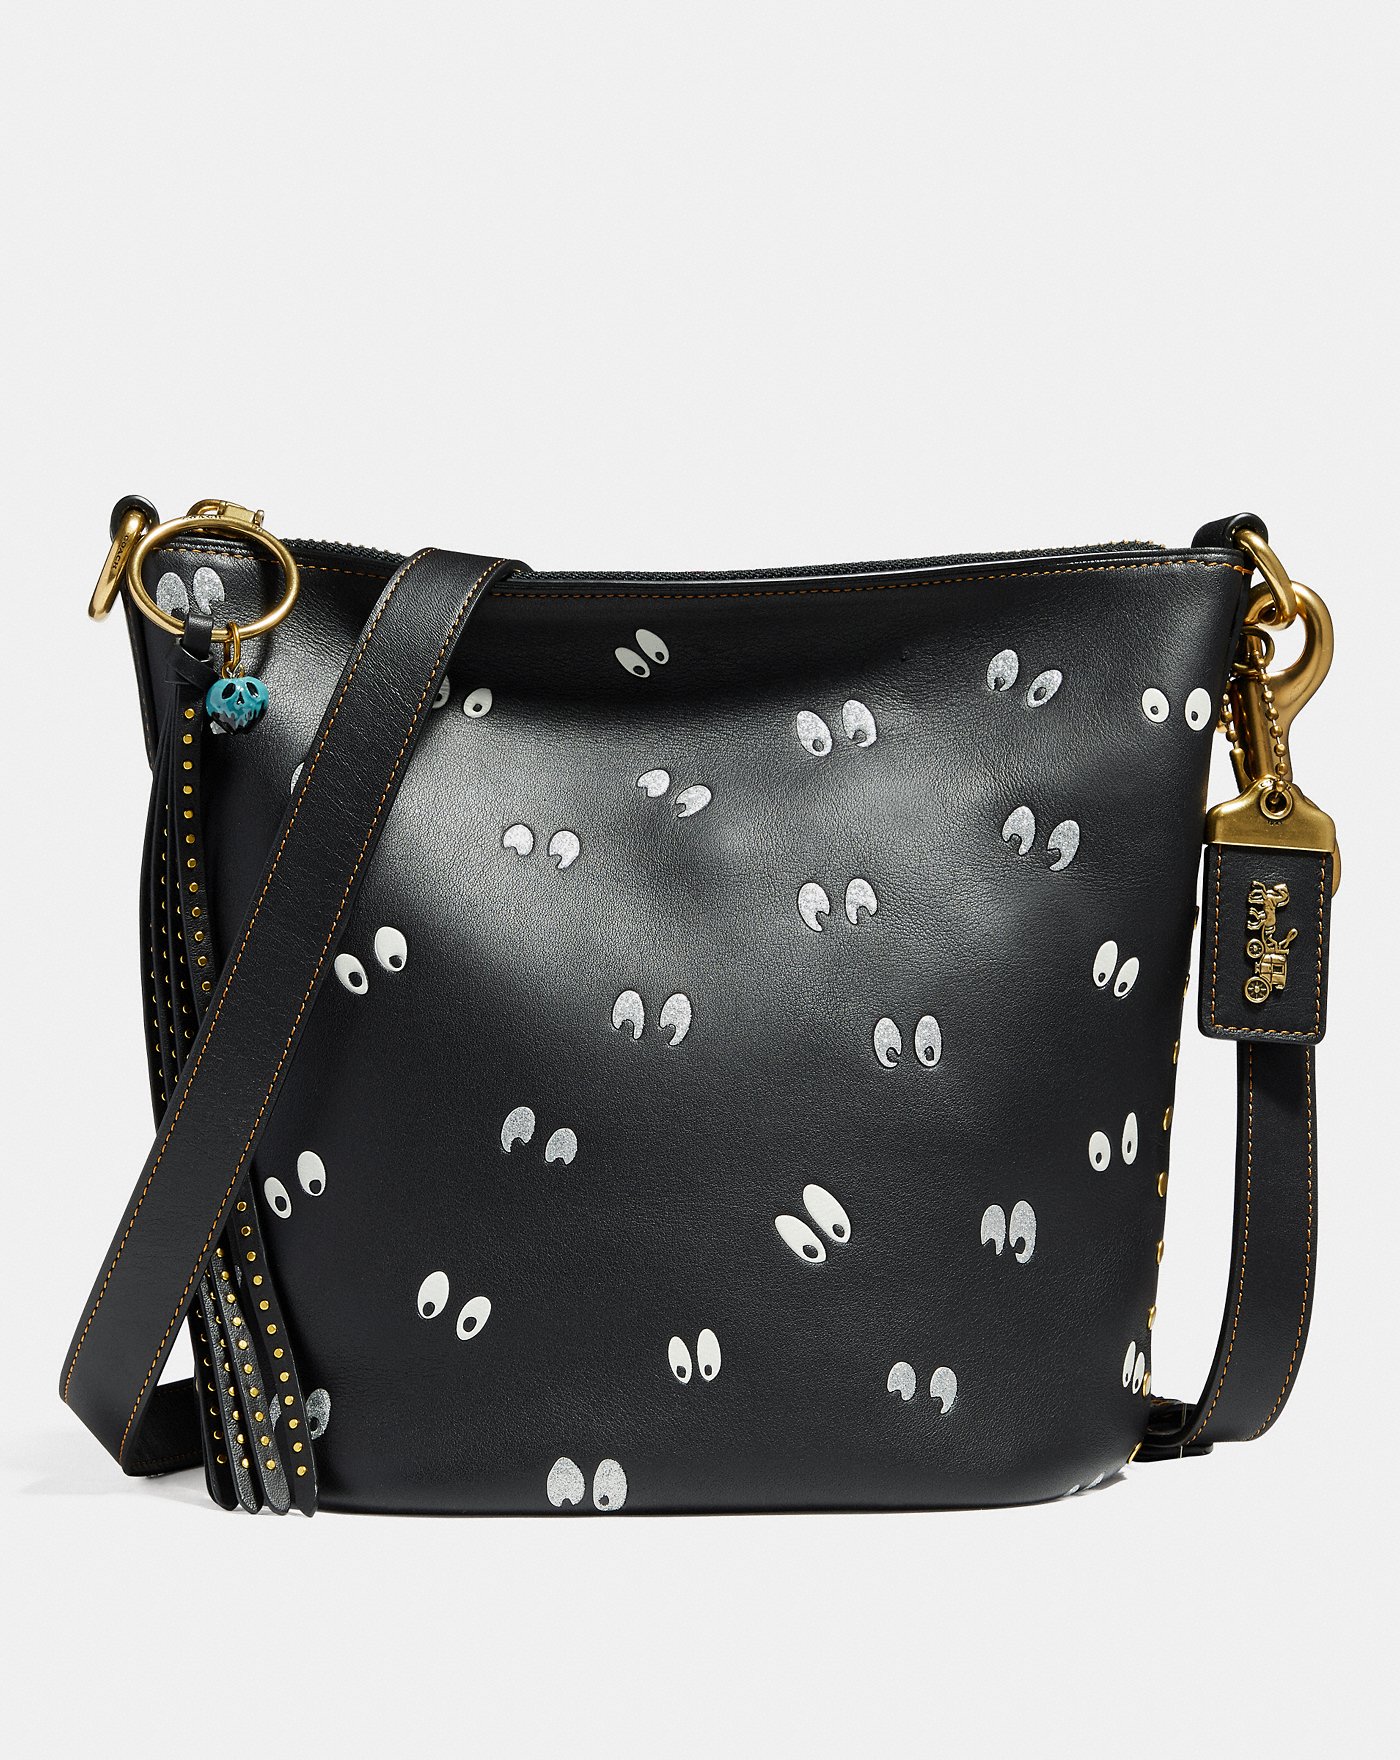 Coach Teams Up With Disney For “A Dark Fairy Tale” Range – PAUSE